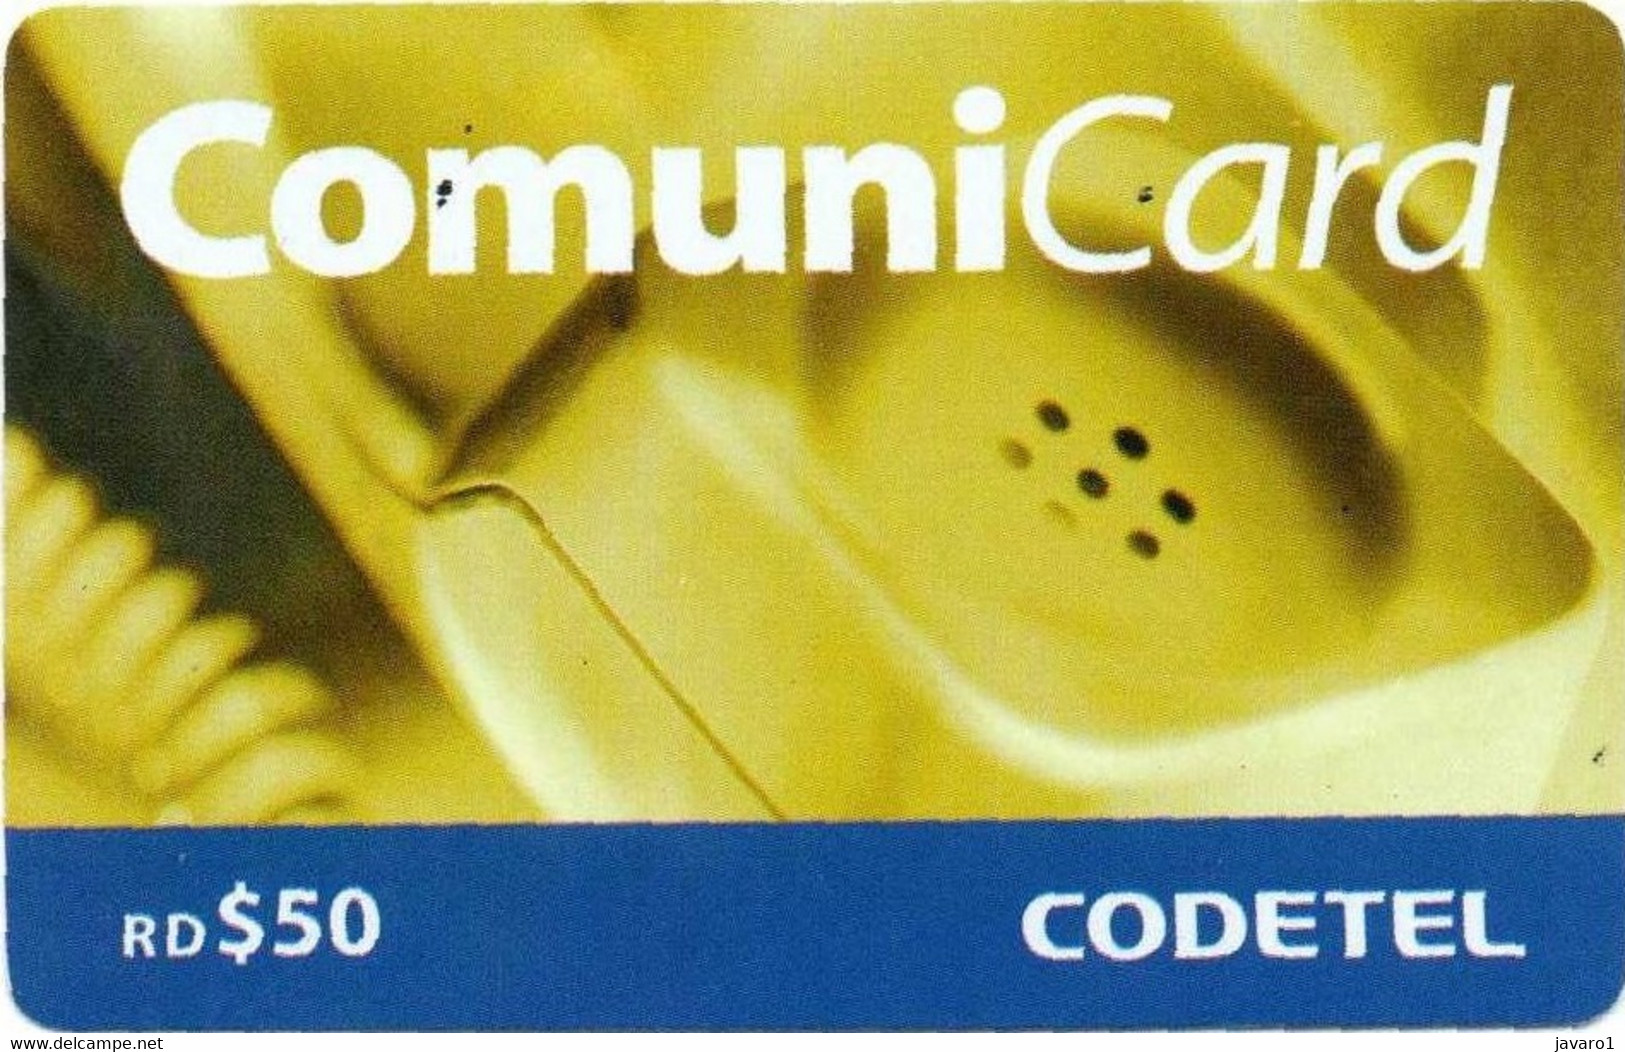 CODETEL : DMC108A RD$50 Yellow Telephone Receiver USED - Dominicana